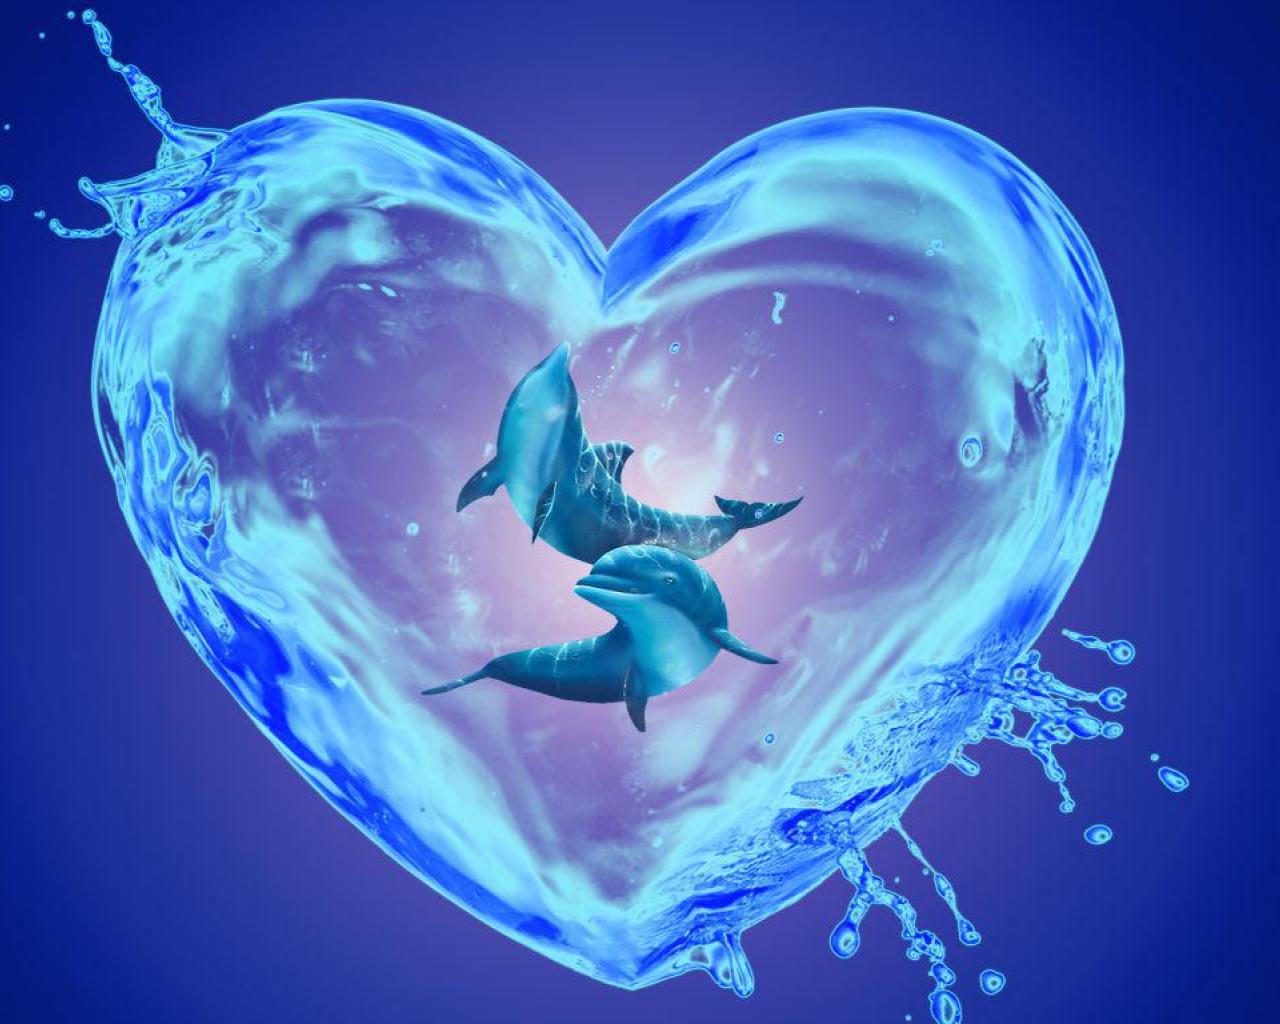 Dolphin heart - (#147600) - High Quality and Resolution Wallpapers ...